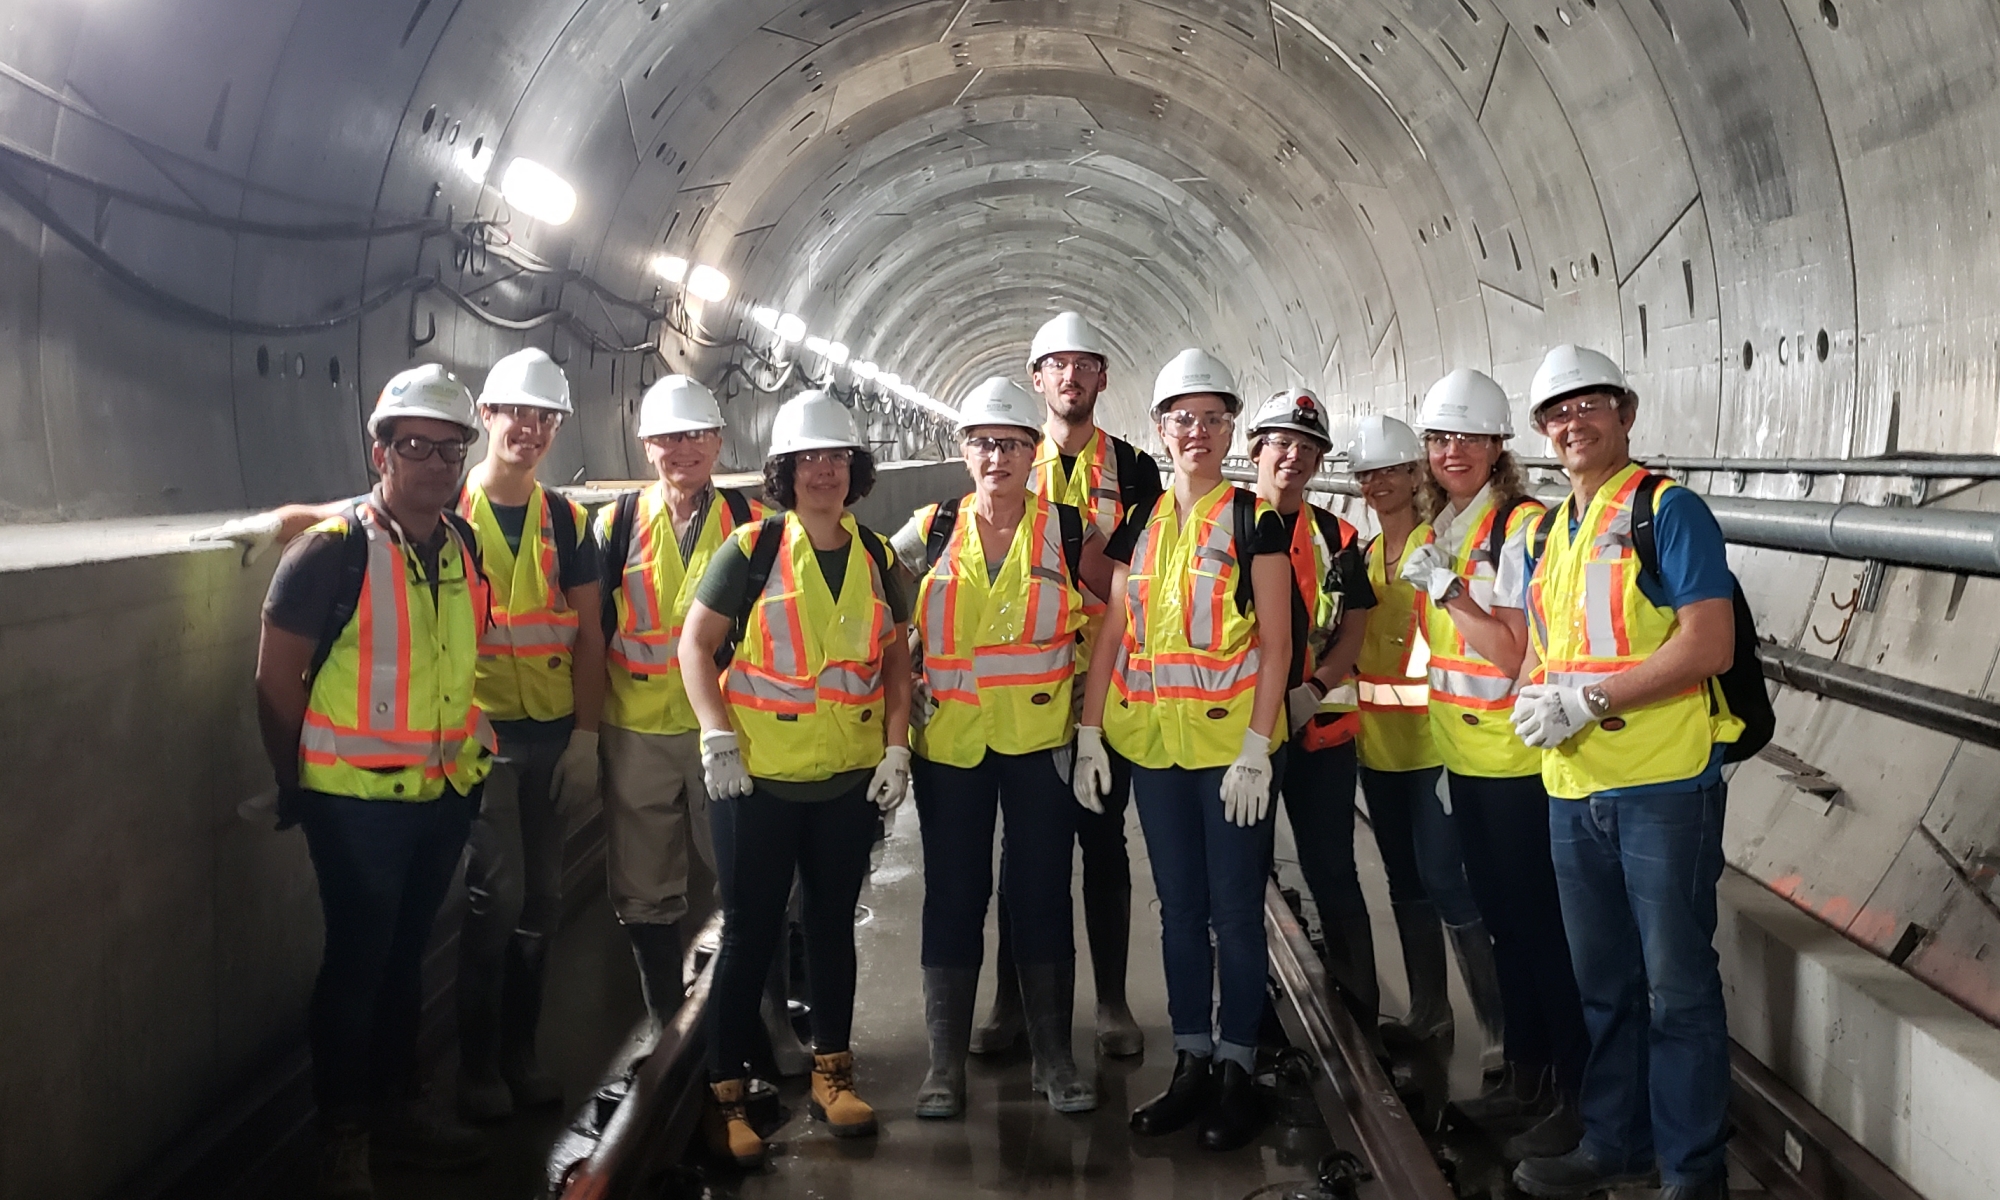 Group of people standing in a tunnel in hard hats and reflective vests.